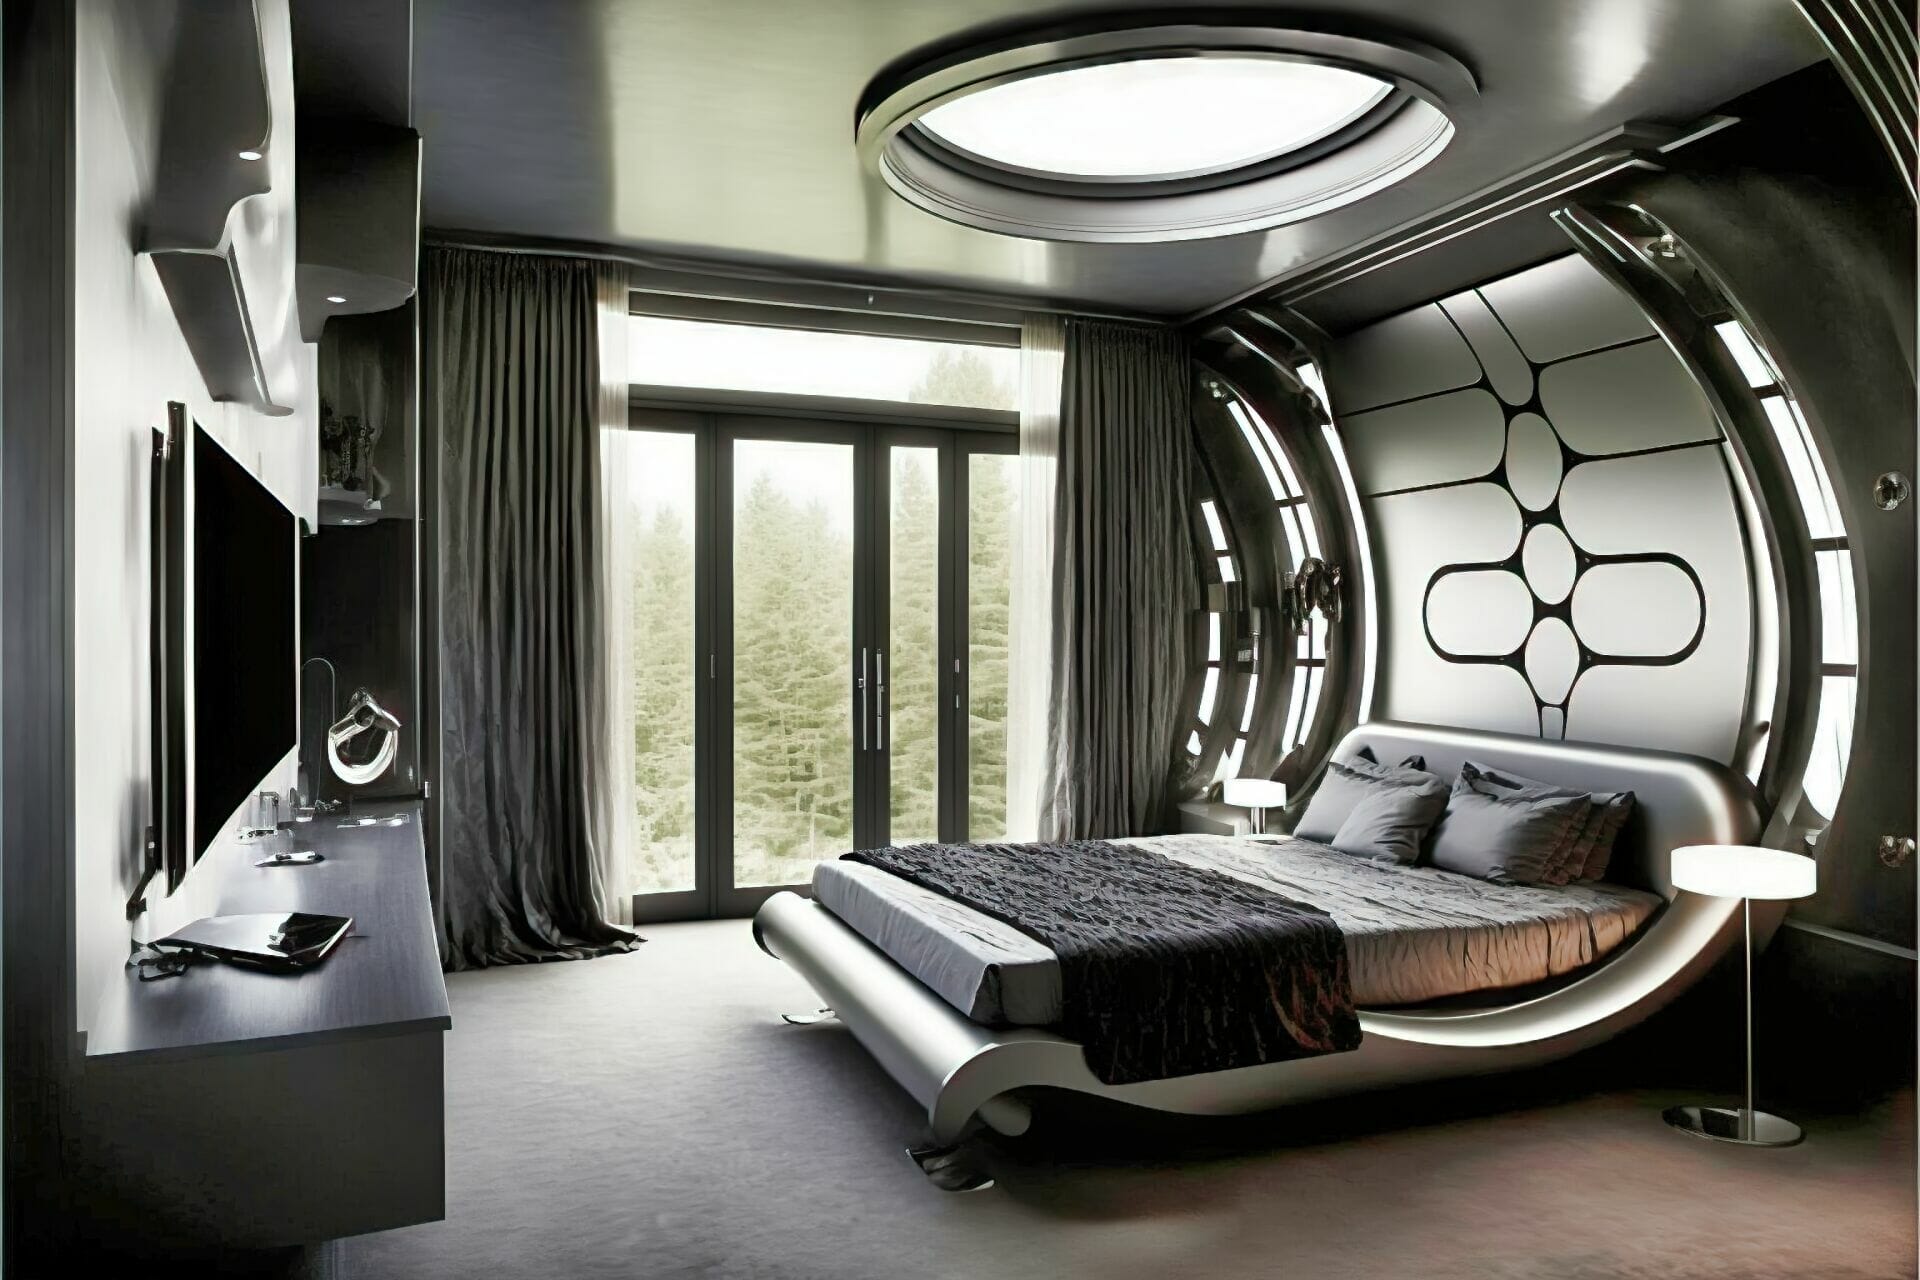 Futuristic Style Bedroom With A Sleek Metallic Finish: Sleek And Modern, This Bedroom Is Outfitted With Luxurious Metal Fixtures, A Large Bed With Plush Bedding, And A Variety Of Metal Furniture Pieces. The Walls And Ceiling Are Painted A Glossy Silver, And The Flooring Is Made Up Of Sleek Black Tiles. Large, Dramatic Windows Offer Views Of The Star-Filled Night Sky.